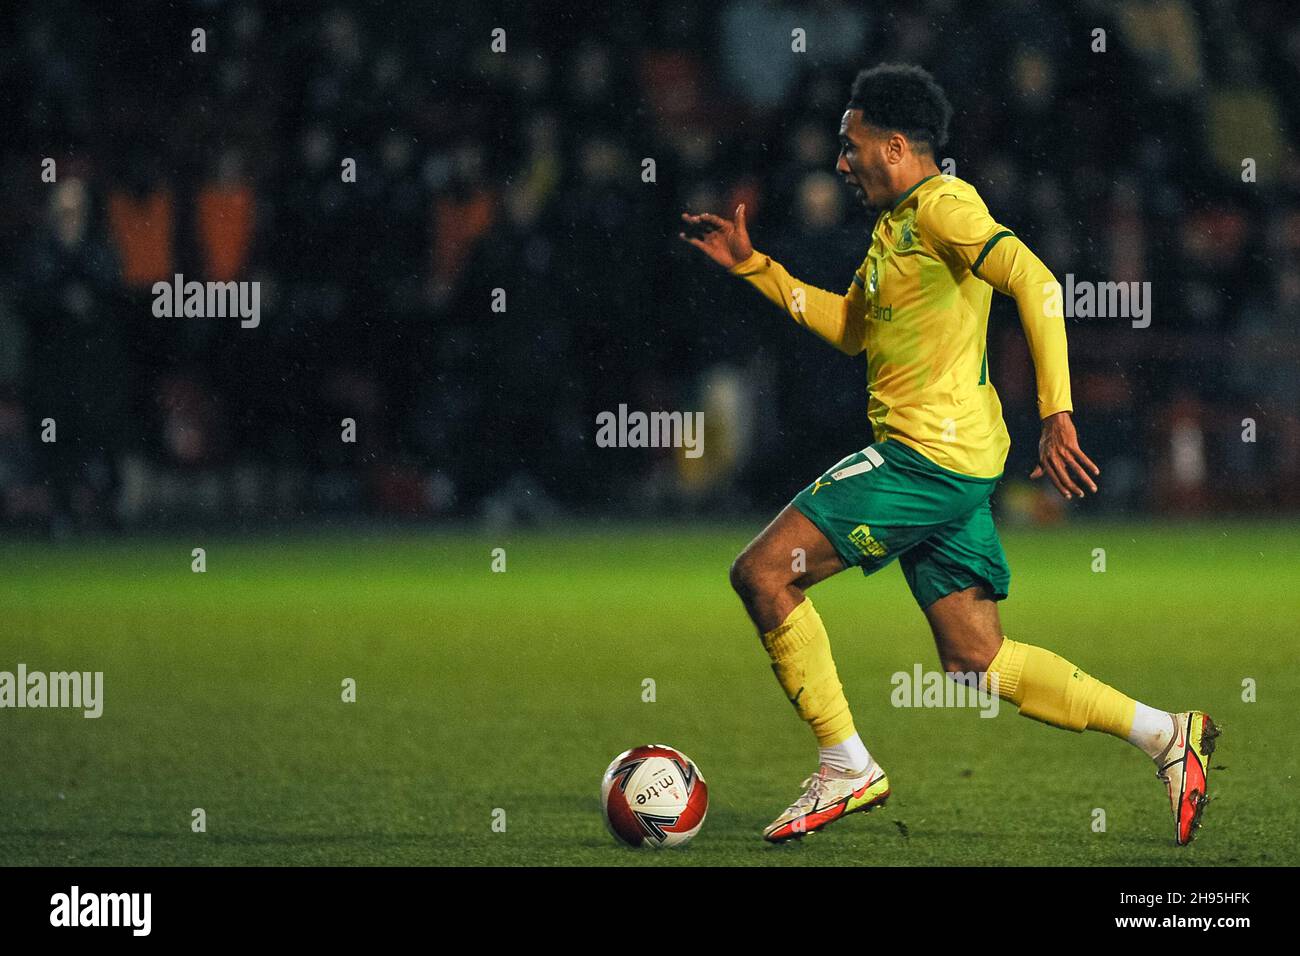 J.Mitchell-Lawson (Swindon no. 17 ) on the attack during the FA Cup second round match between Walsall and Swindon Town at the Banks's Stadium, Walsall, England on 4 December 2021. Photo by Karl Newton/PRiME Media Images. Credit: PRiME Media Images/Alamy Live News Stock Photo